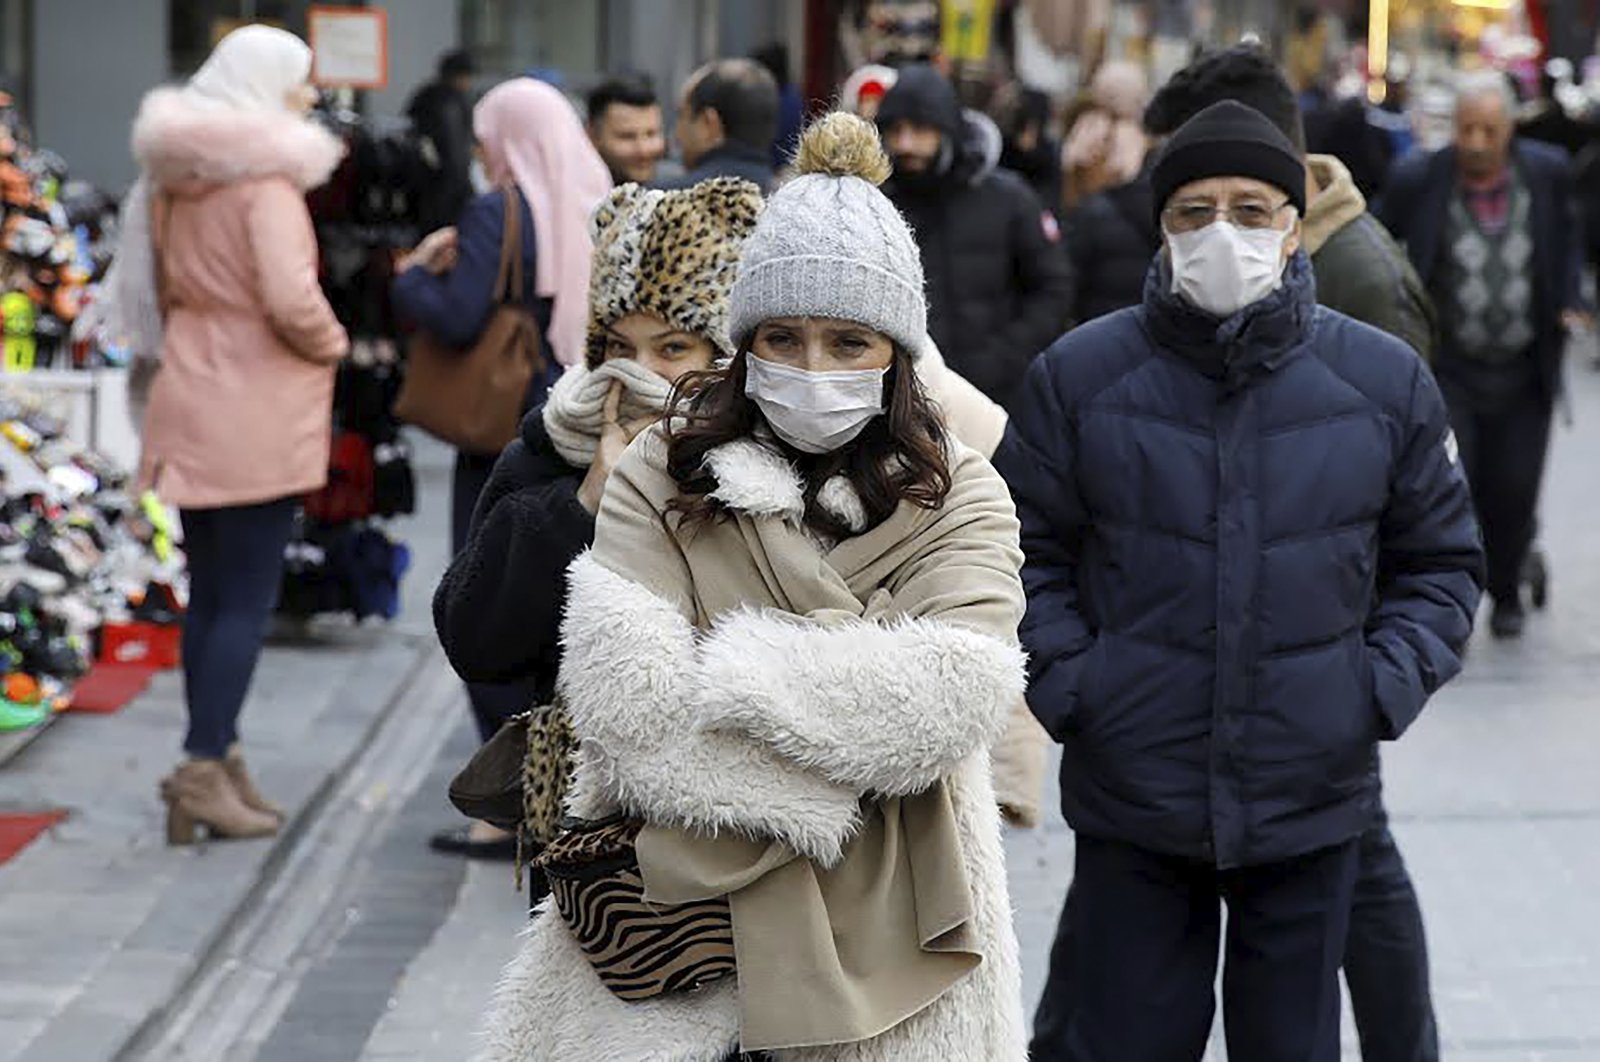 People wear protective masks due to coronavirus concerns in Istanbul, Turkey, March 16, 2020. (Reuters Photo)